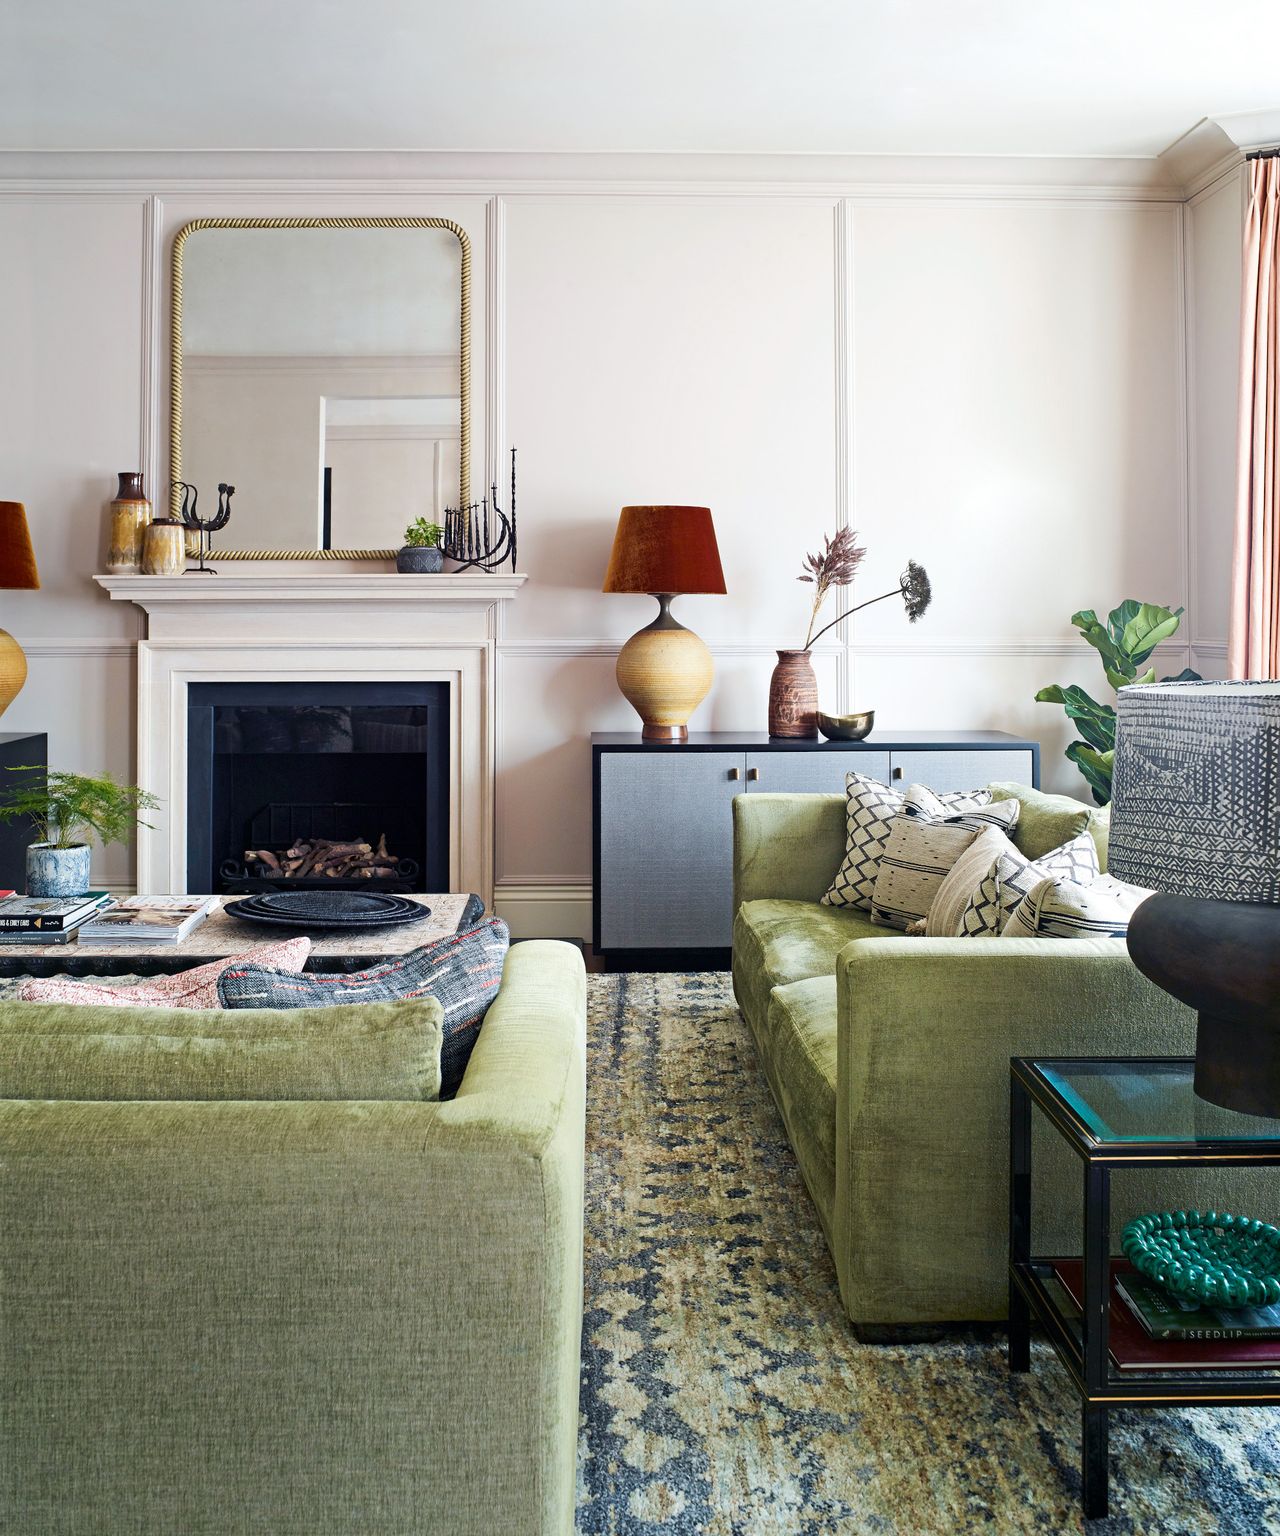 This London townhouse is a masterclass in decorating with elegant pastels